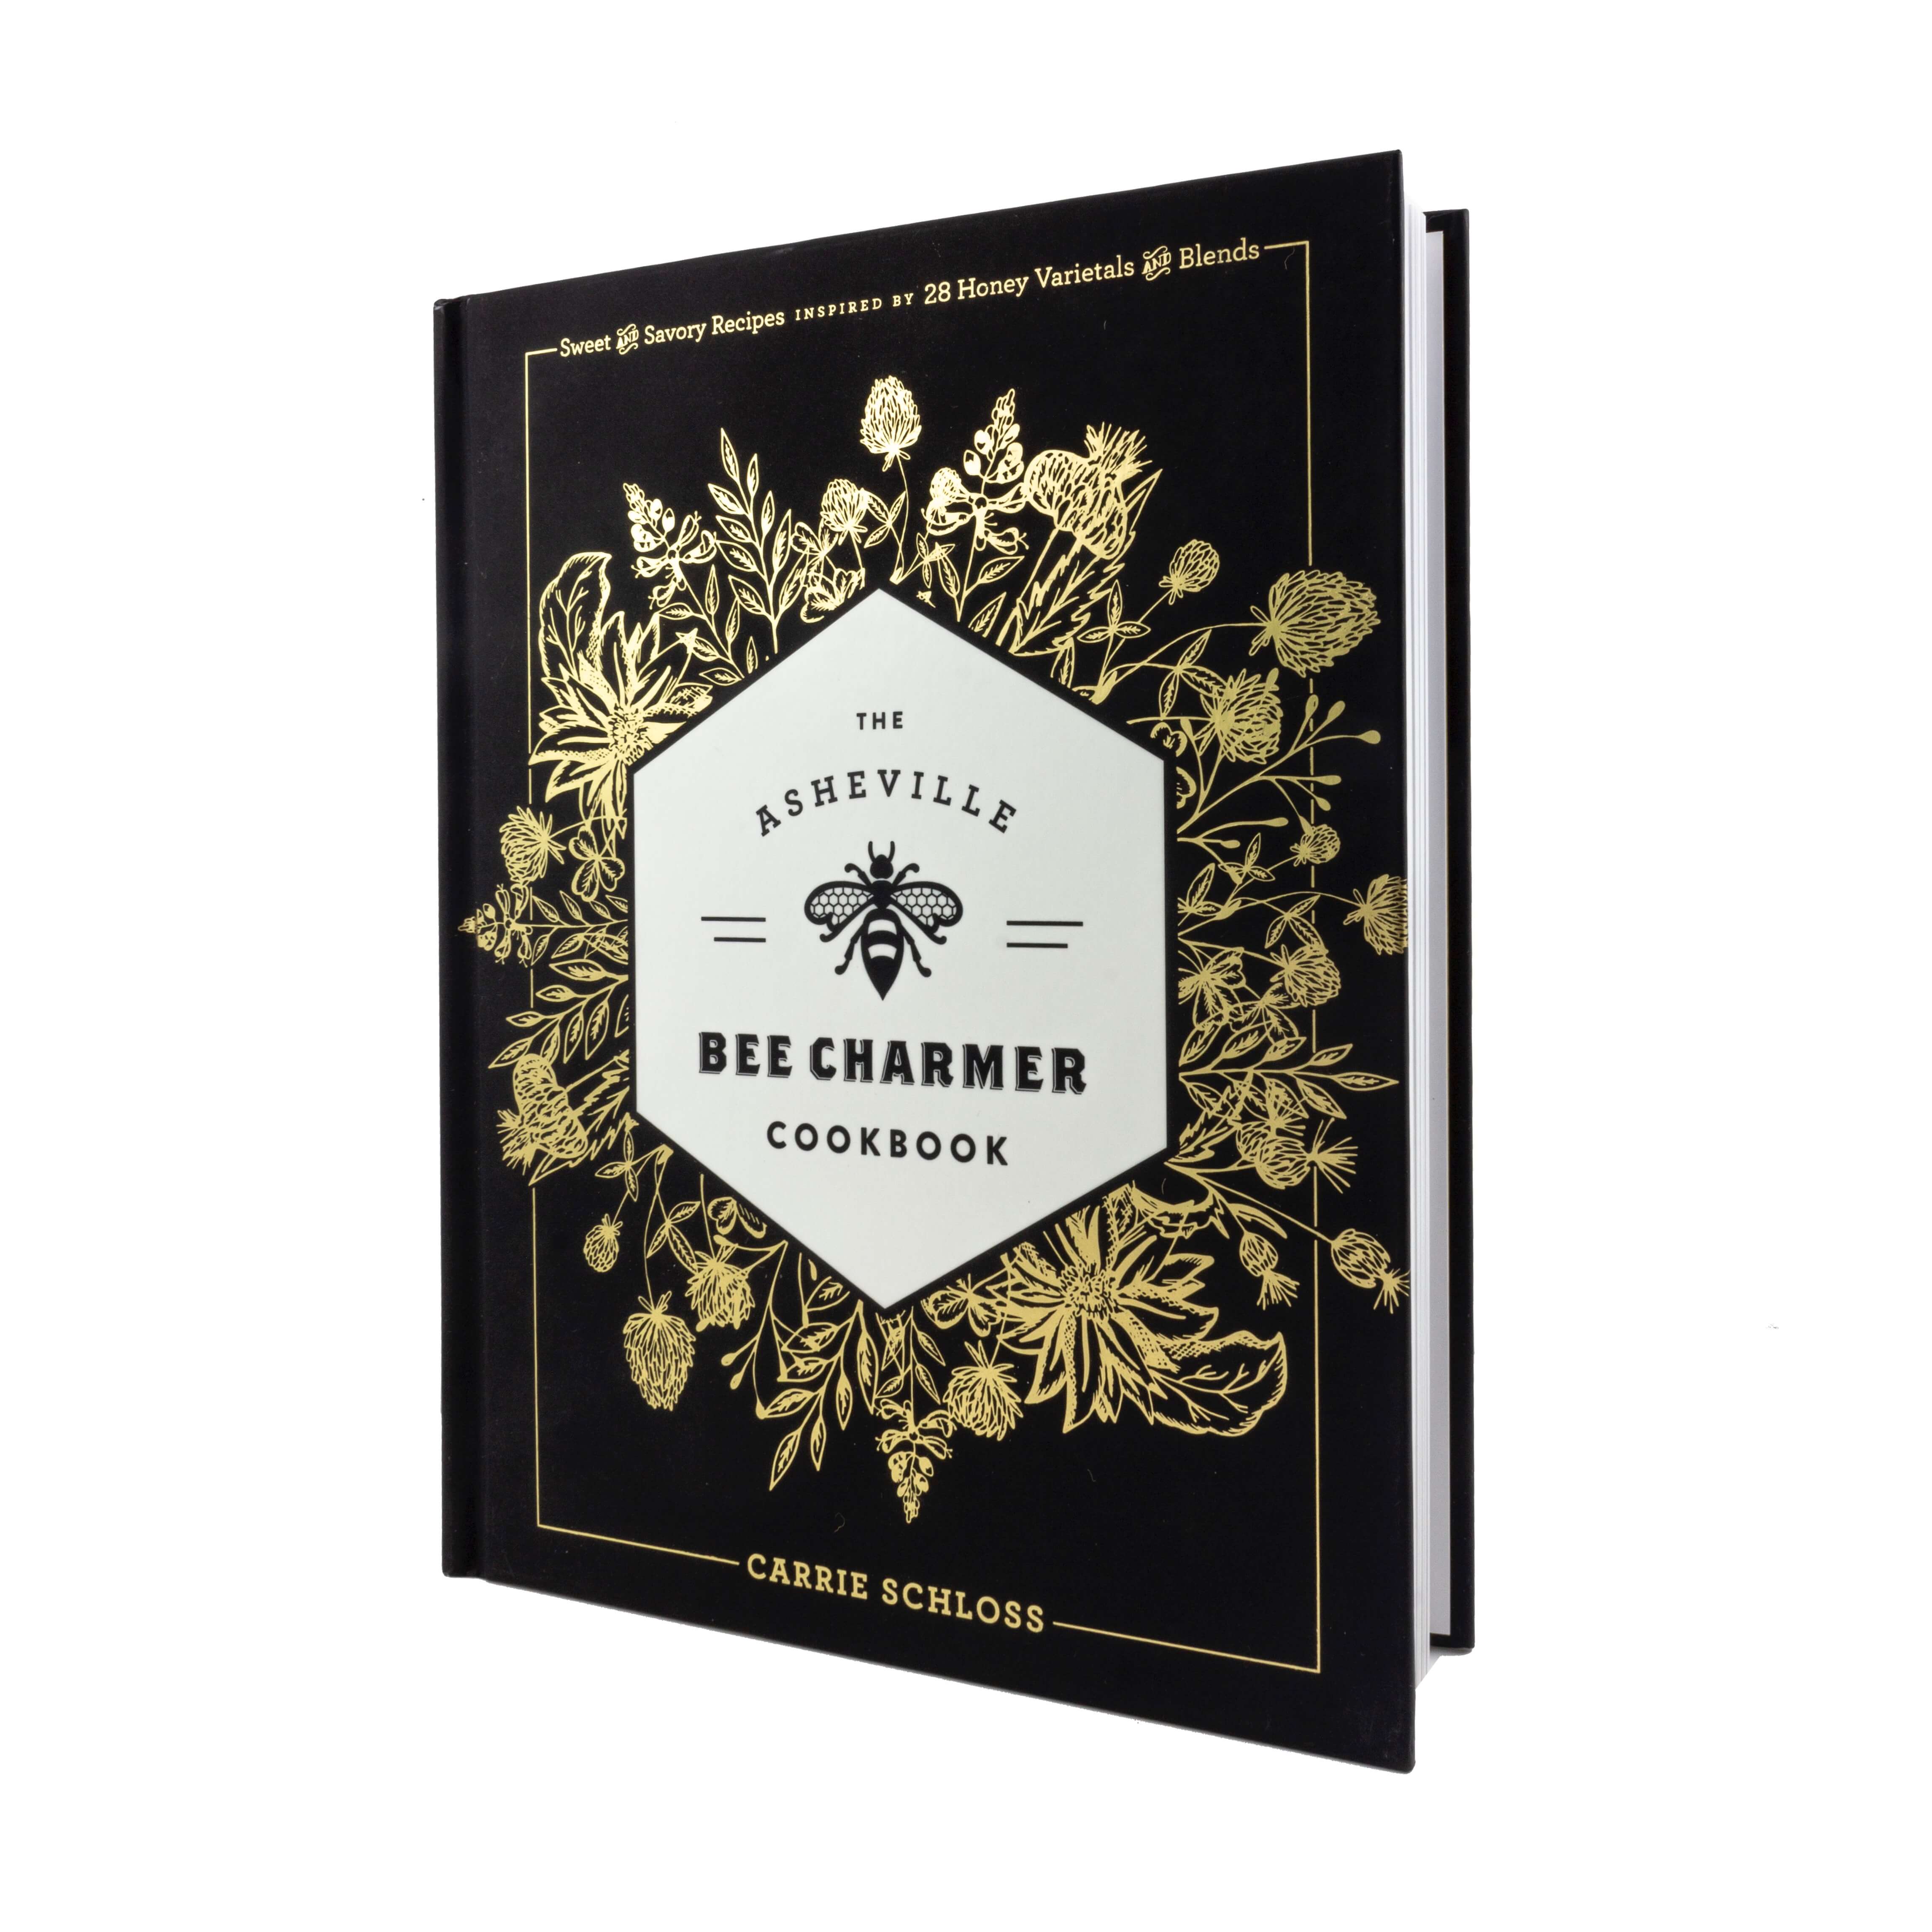 Bee Charmer Cookbook from Royal Bee